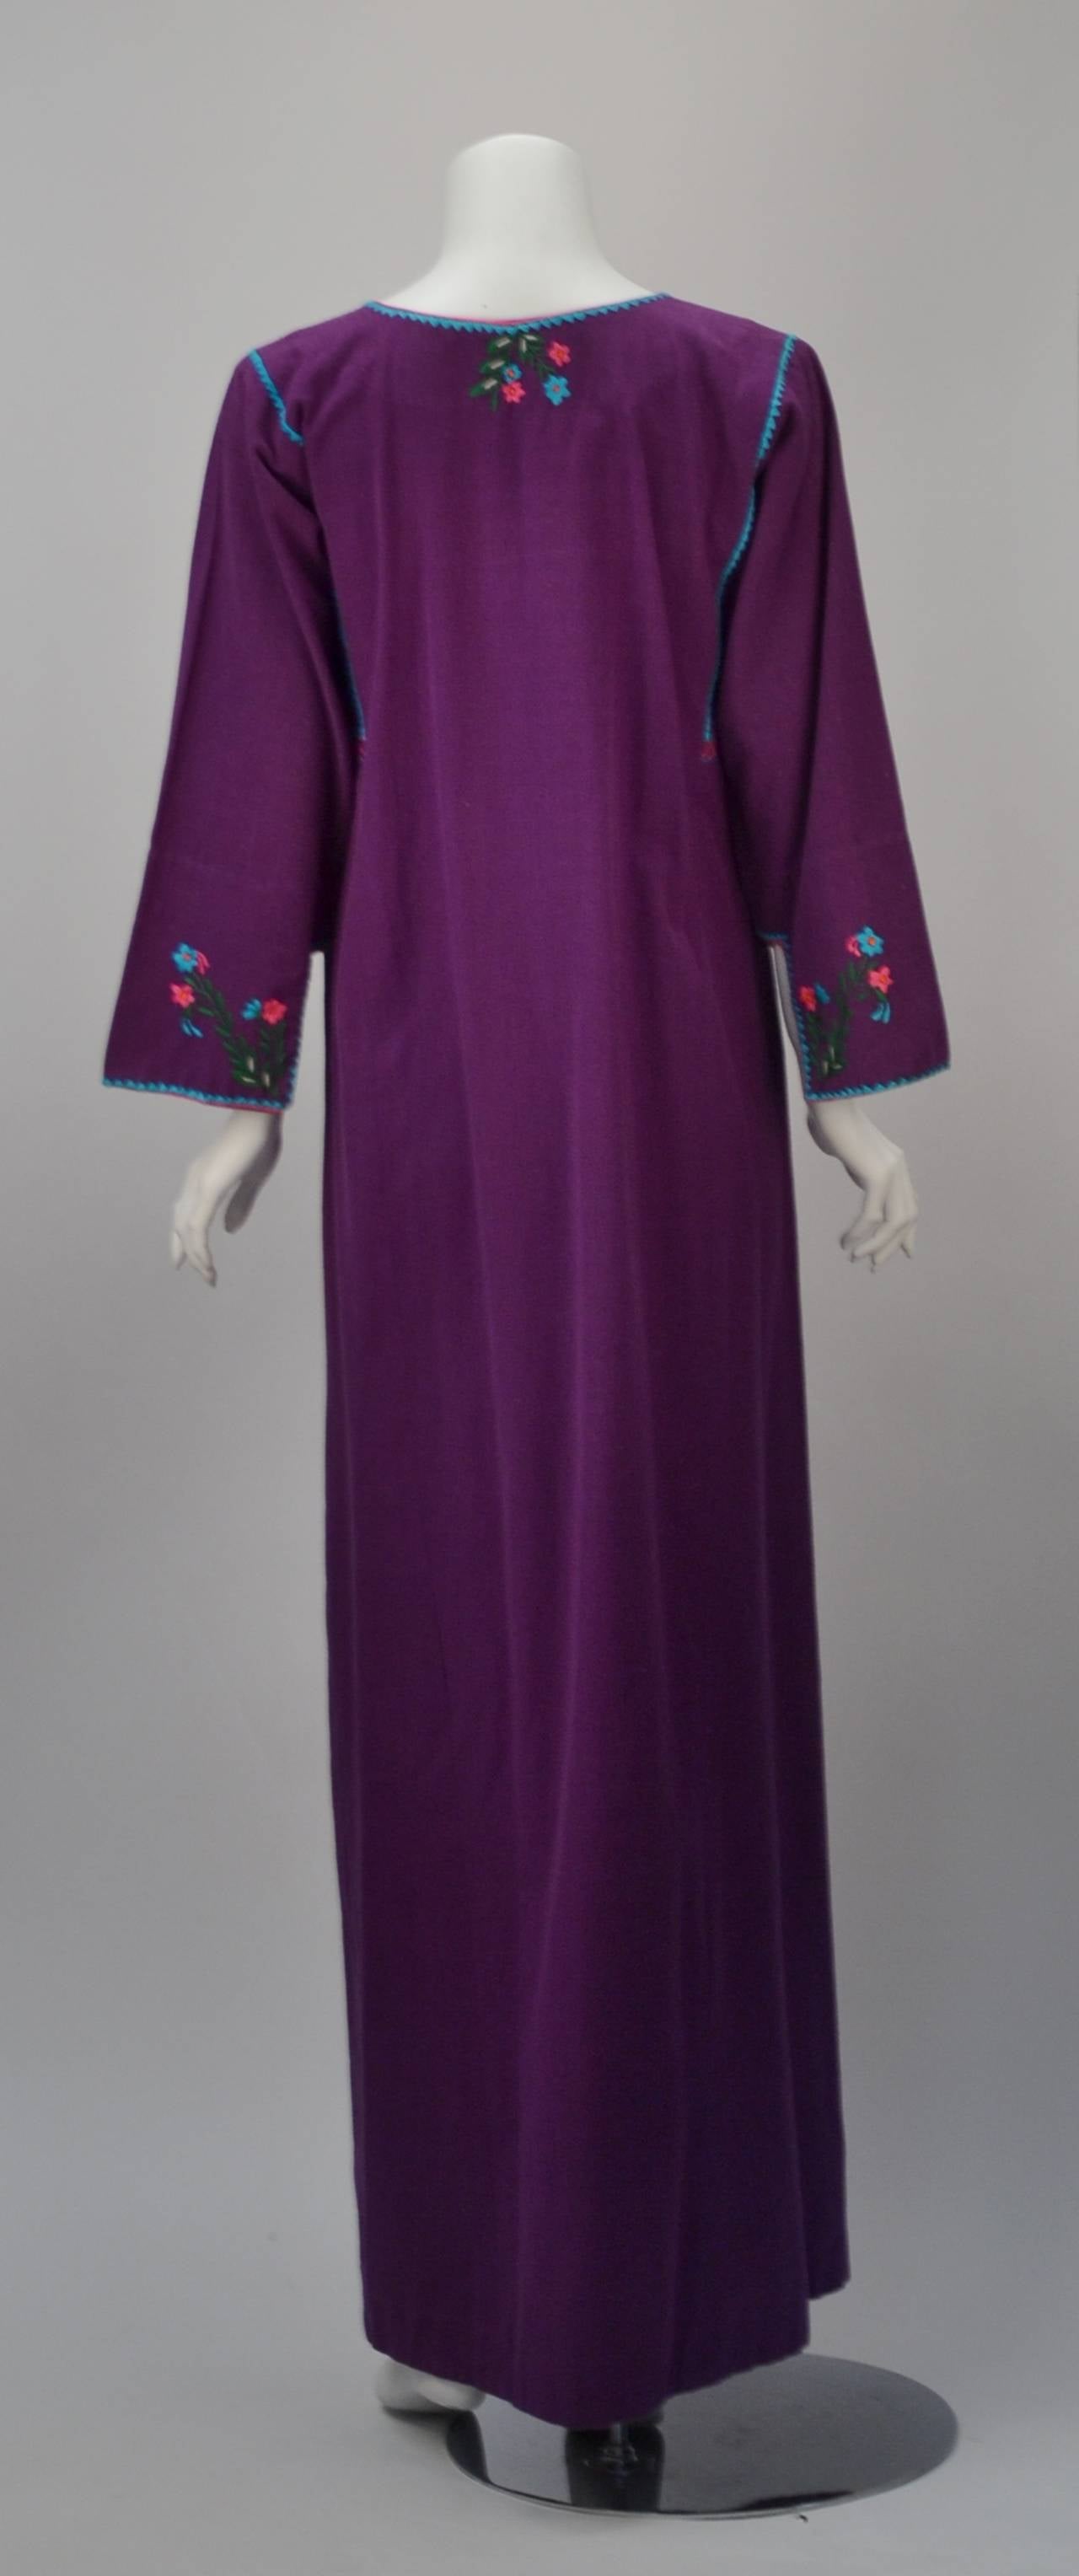 Beautiful 1970s long purple kaftan. Designer cut out sleeves and trimmings. Small floral embroidery around scooped V neckline and sleeves. 100% cotton.

One size fits all

*All garments and accessories have been professionally cleaned and thoroughly